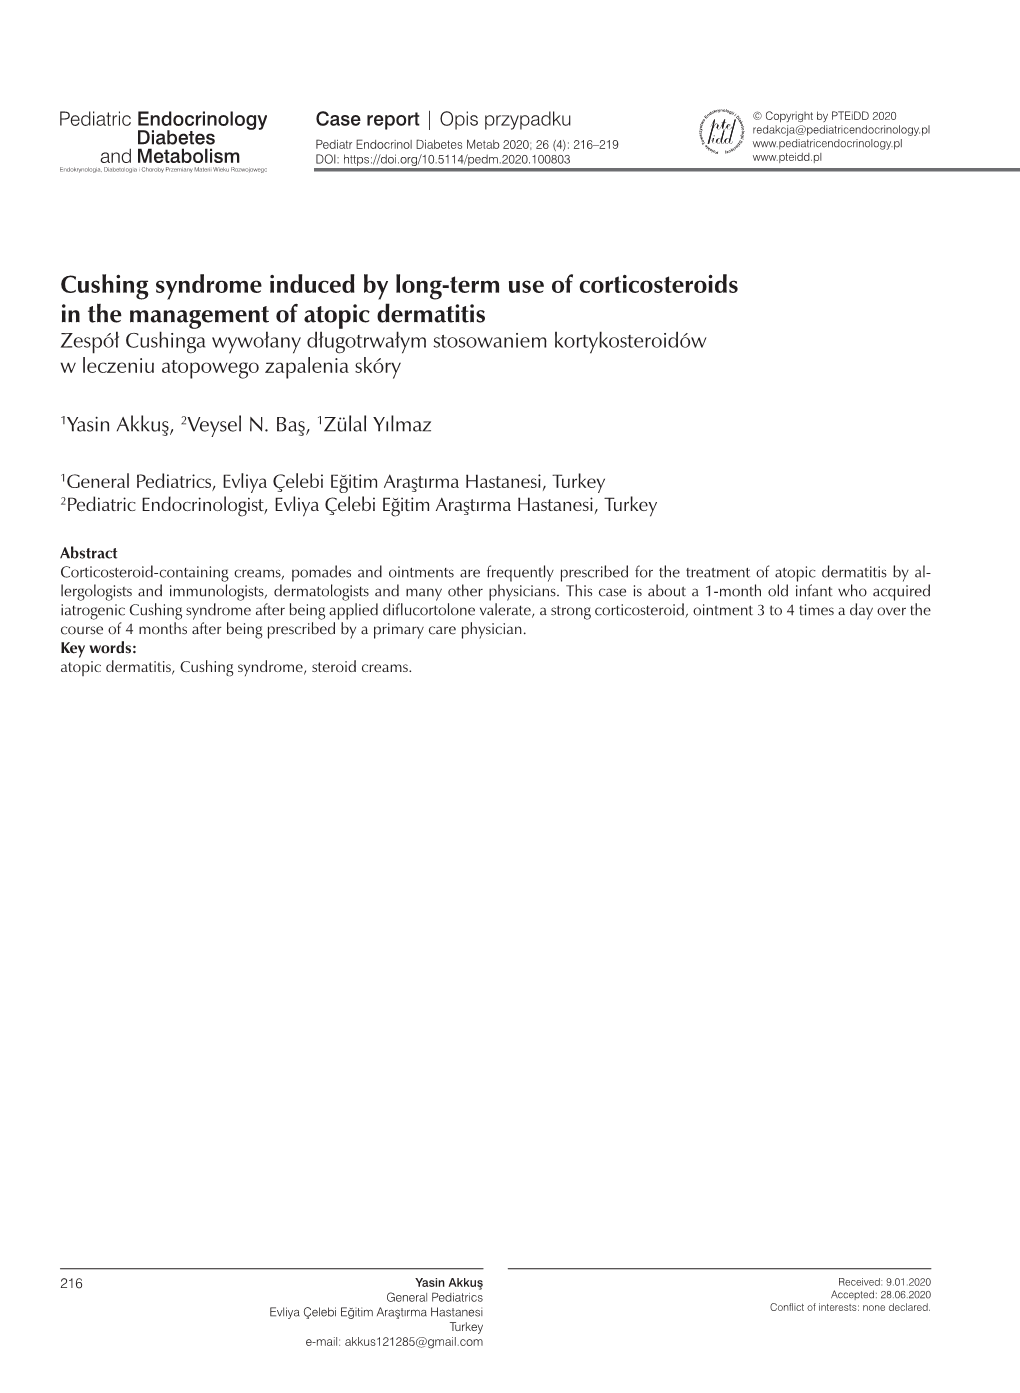 Cushing Syndrome Induced by Long-Term Use of Corticosteroids In